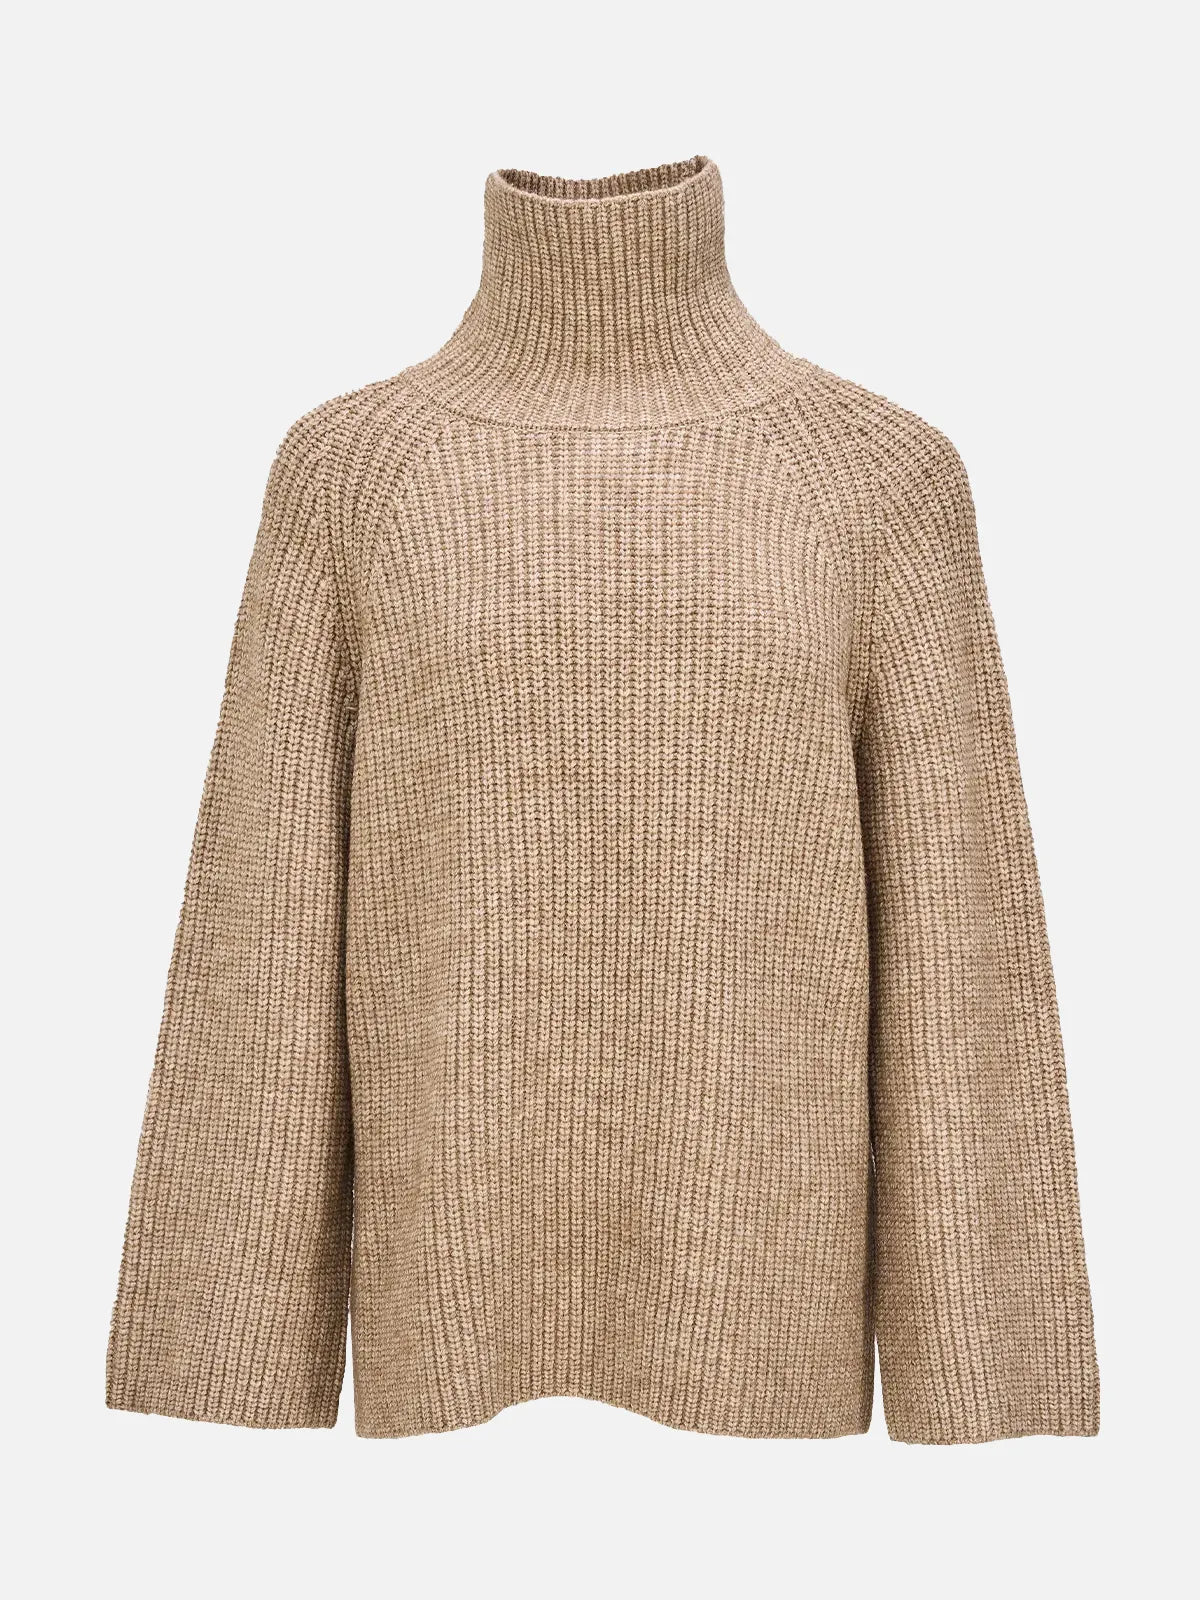 Women's Knit Sweater: Drop-Shoulder Sleeves for a Distinctive Silhouette and Ribbed Texture Sophistication